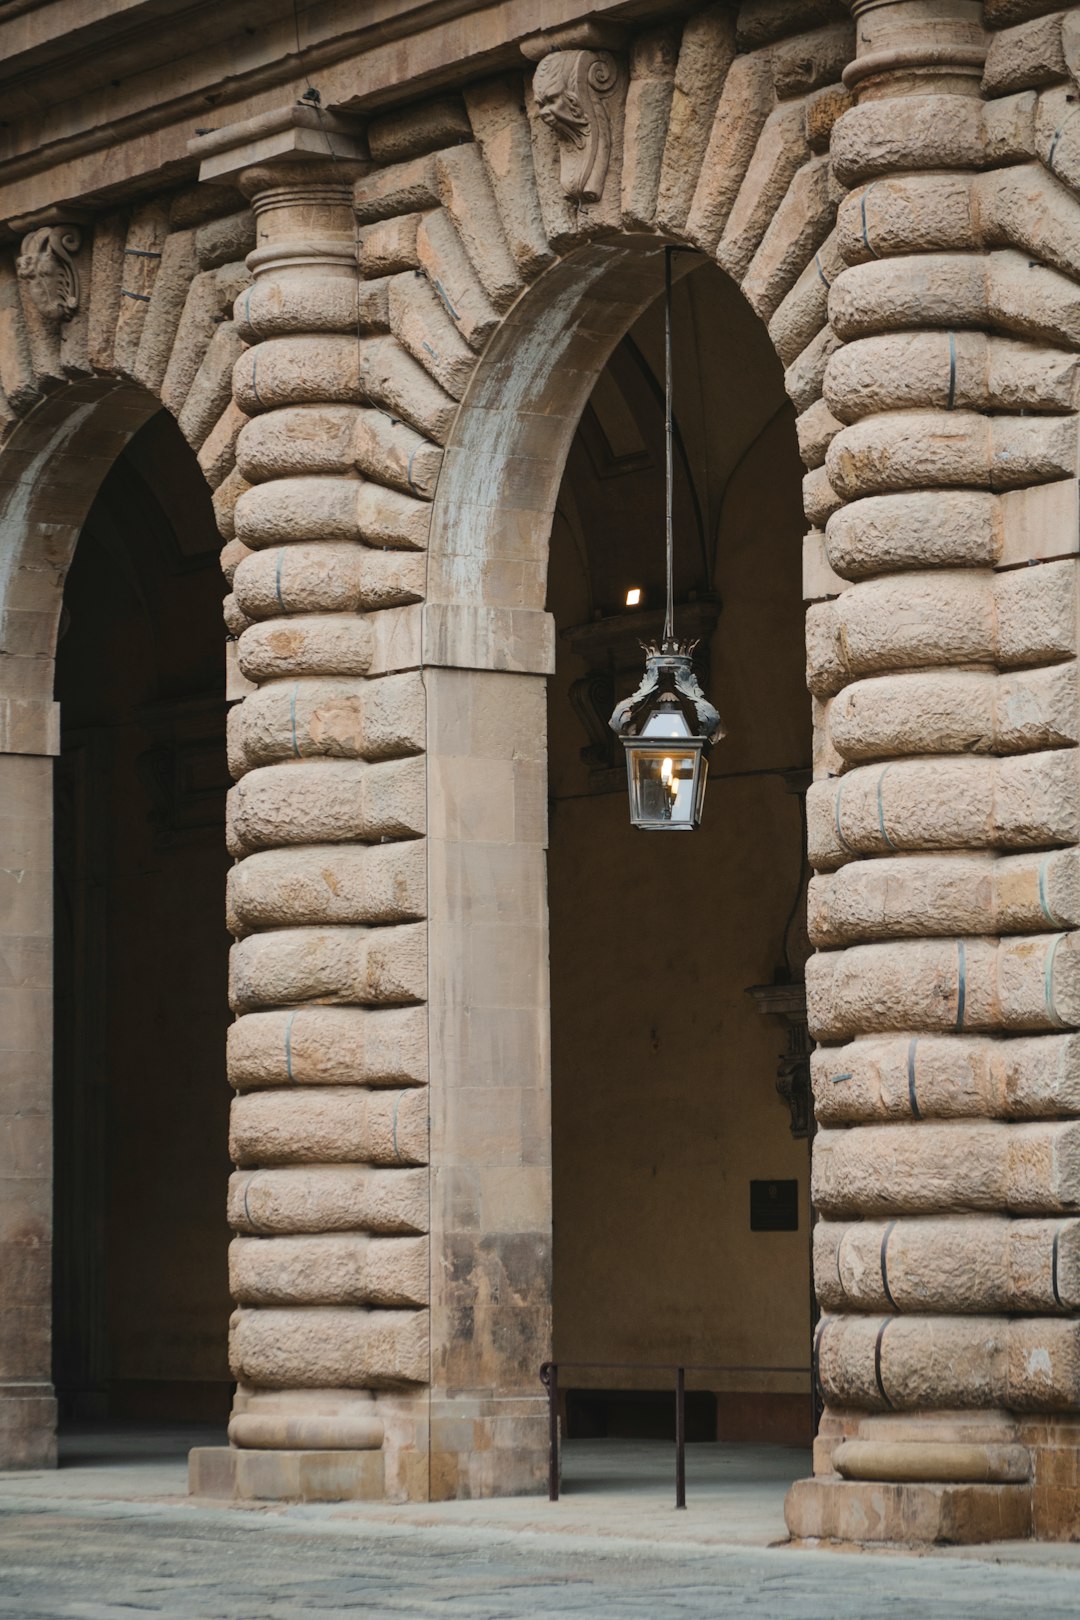 pendant lamp over arch entryway